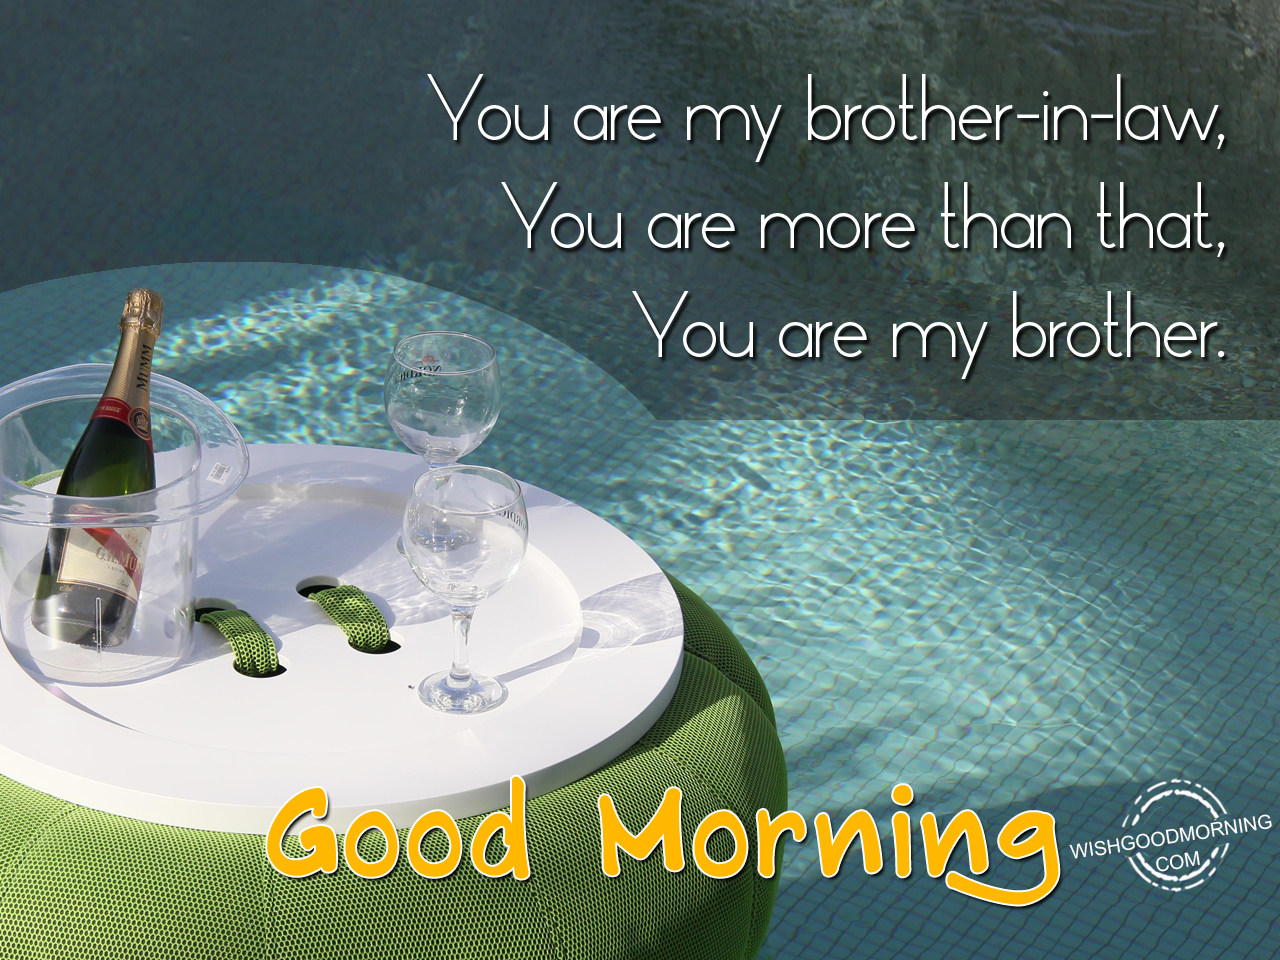 Good Morning Wishes For Brother-in-law - Good Morning Pictures ...